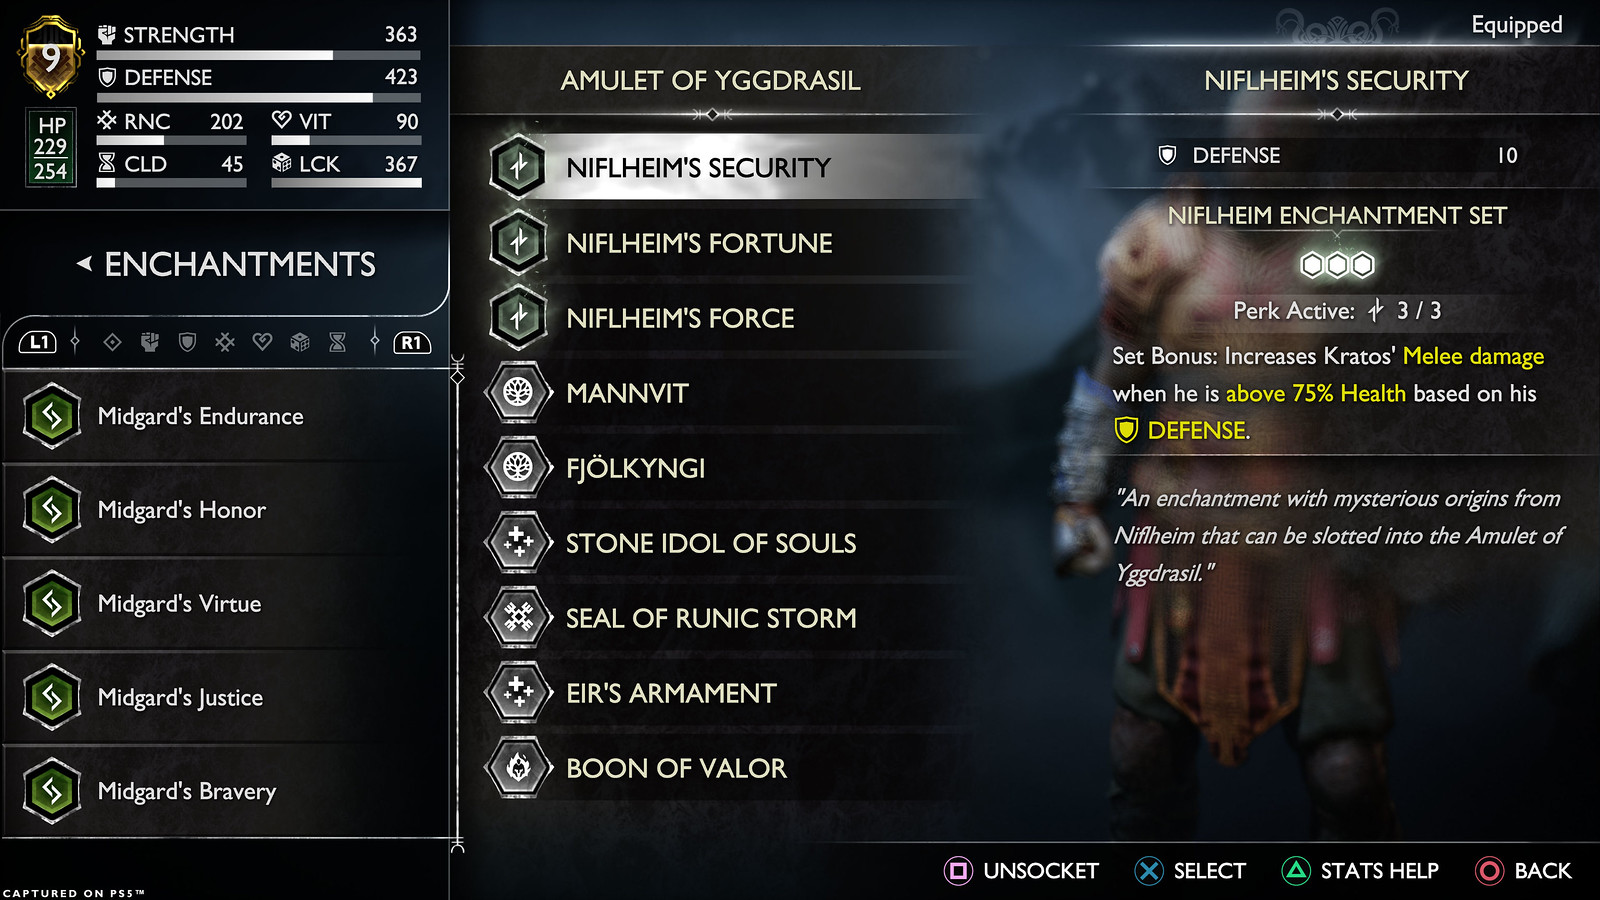 Image show the in-game Enchantments menu with the recommended Enchantments equipped in the Amulet of Yggdrasil. The selected Enchantment is one from the Niflheim set, showing the Set Bonus effect that increases Kratos’ Melee when he is above 75% of health based on Defense.  